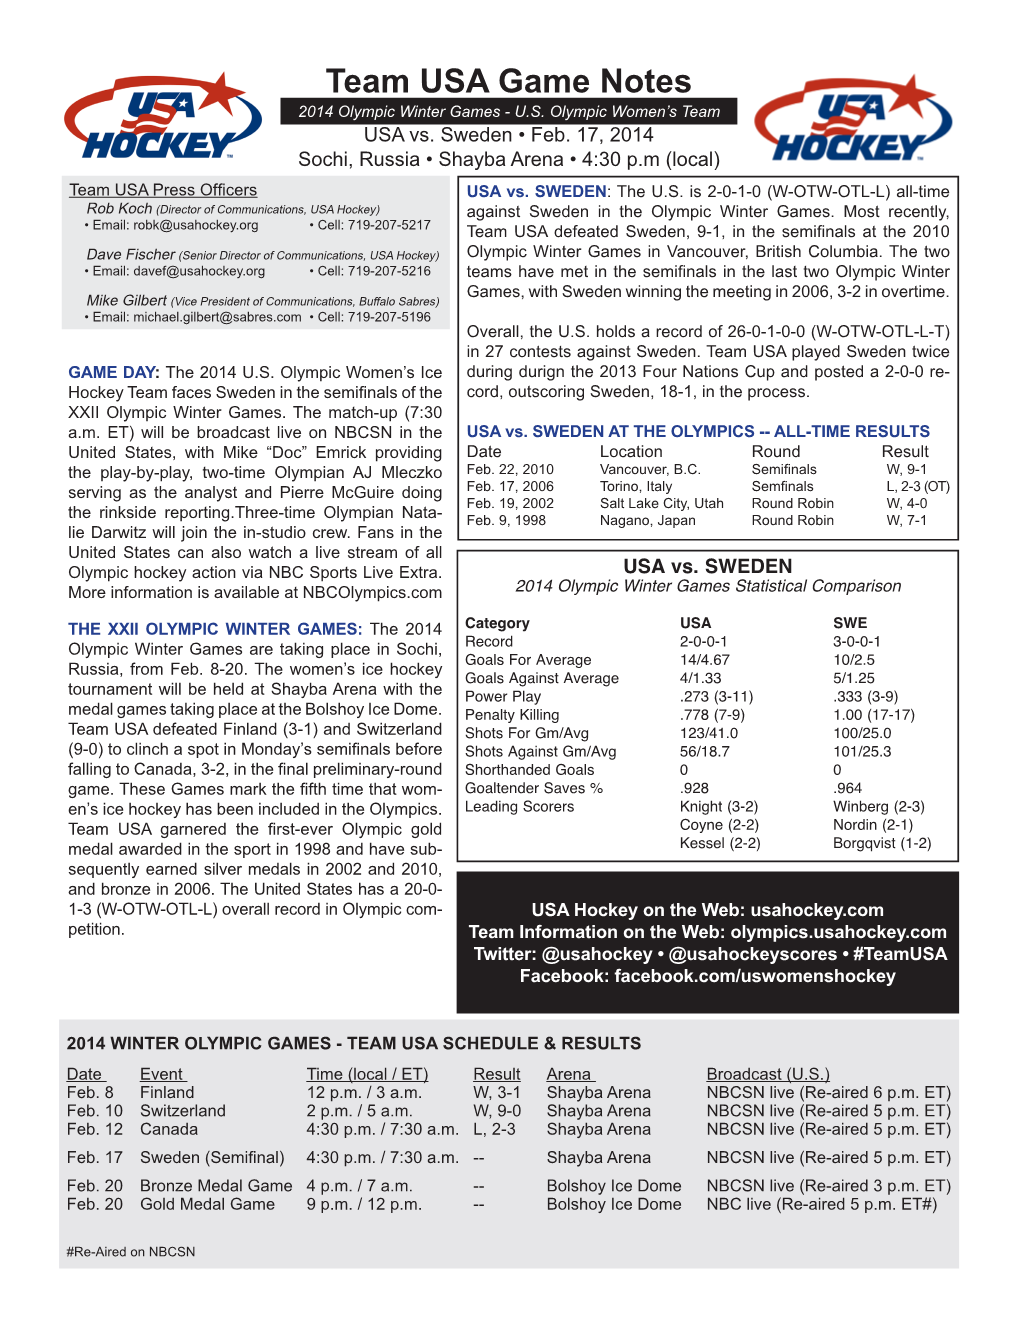 Oly Women Game Notes.Indd